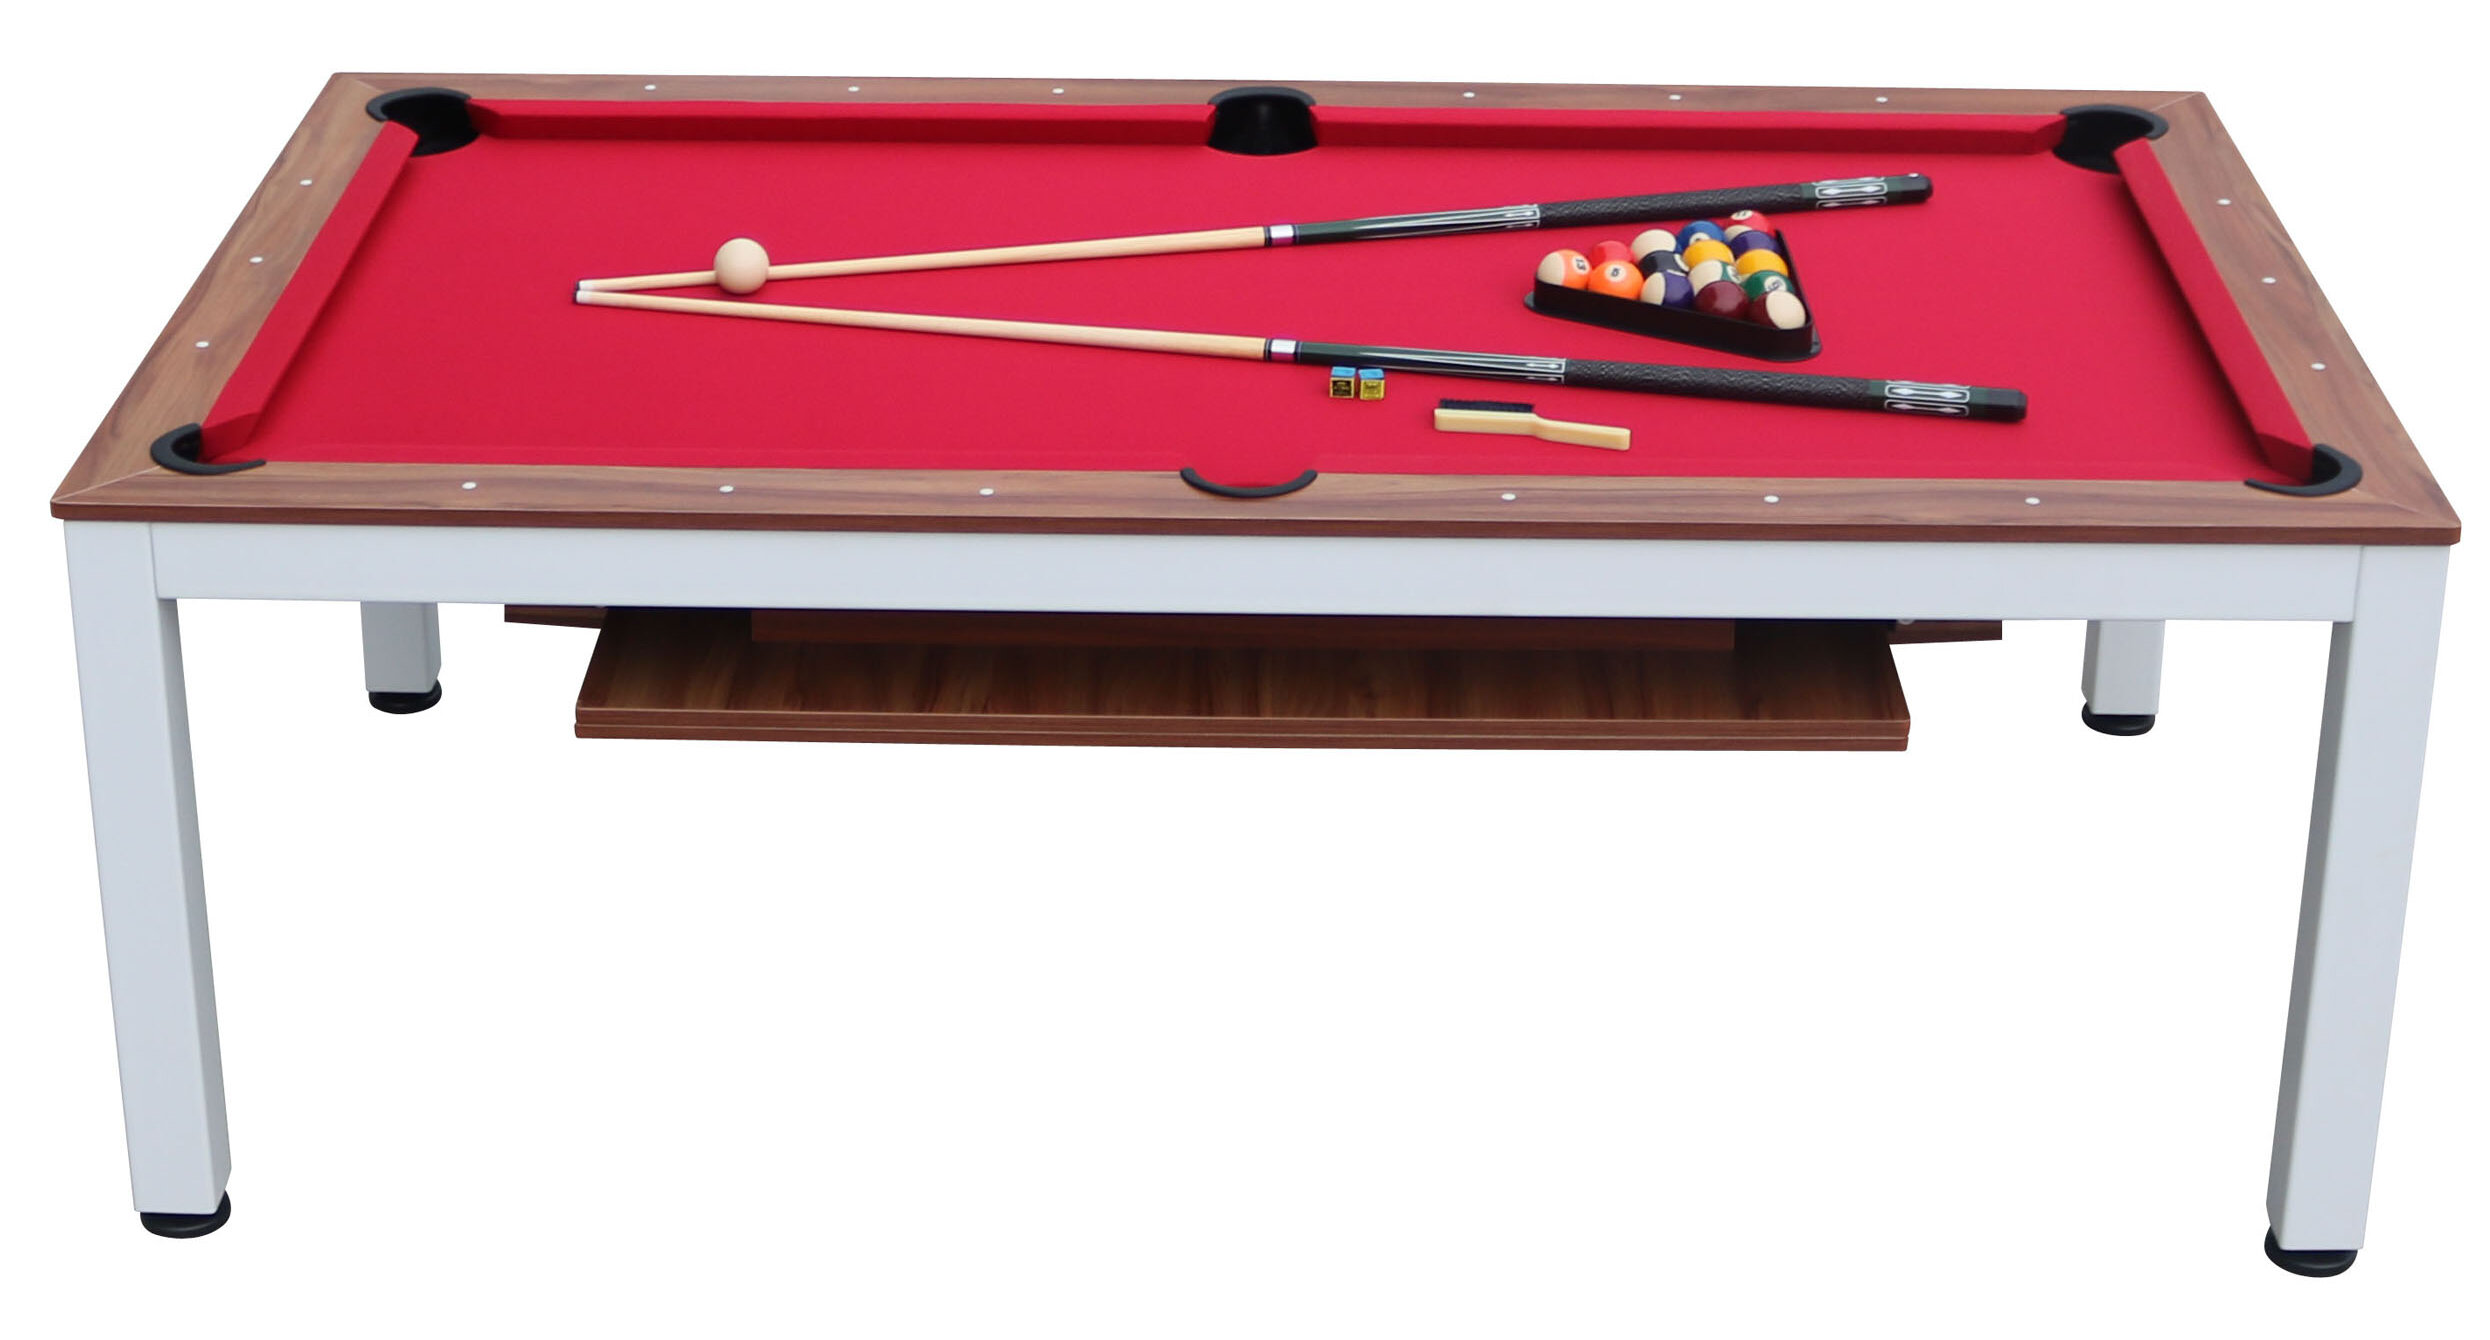 Playcraft Glacier 7 Pool Table with Dining Top